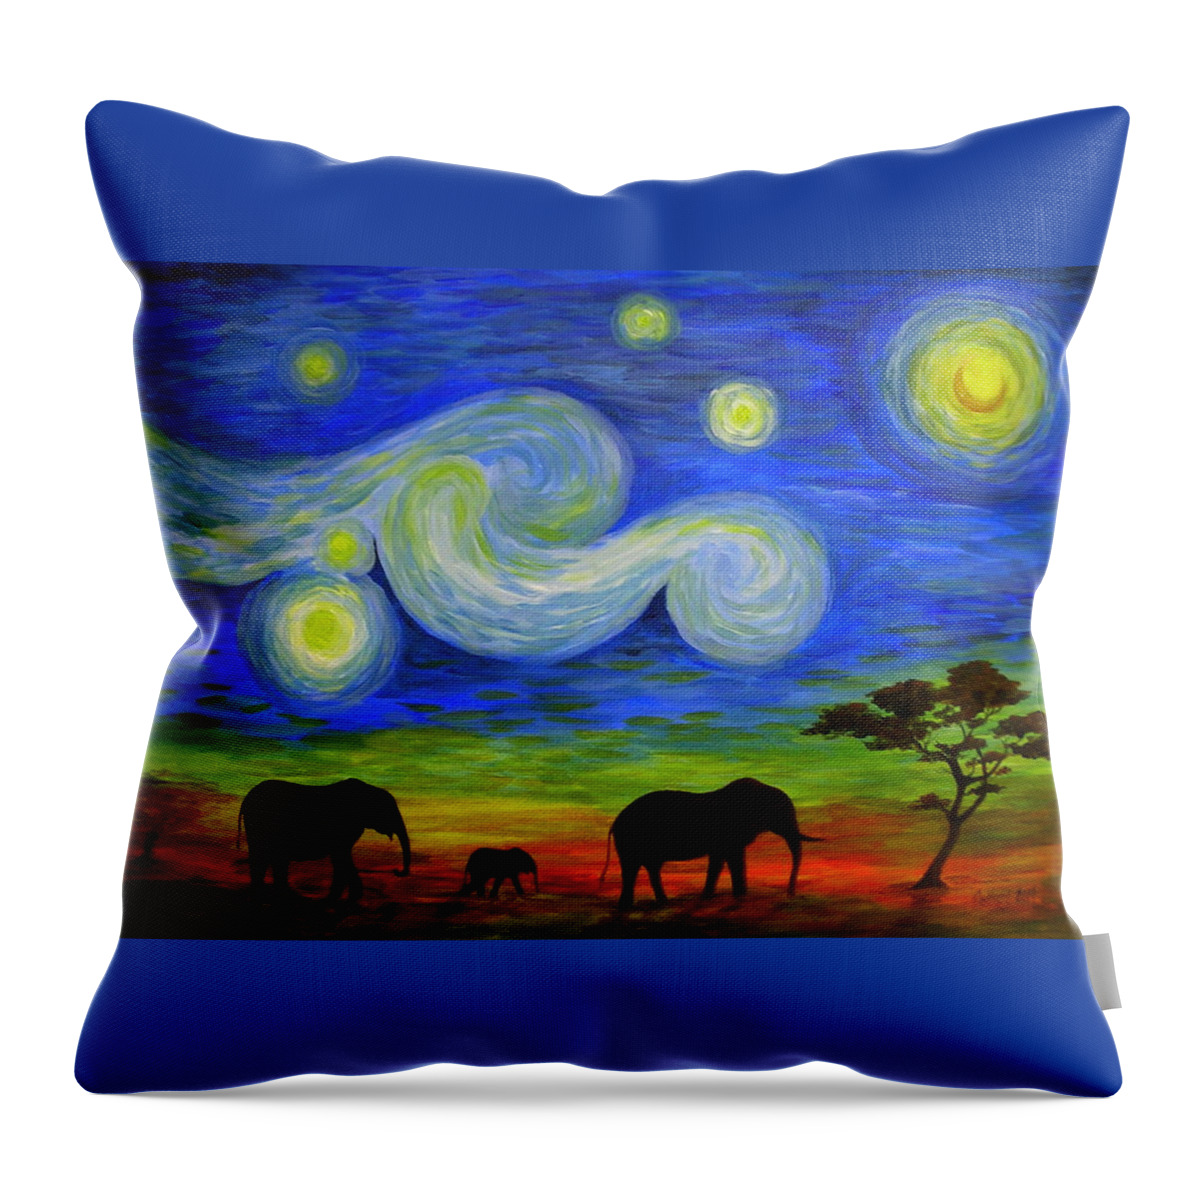 Acrylic Throw Pillow featuring the painting Starry Night Over Africa by Catherine Howley